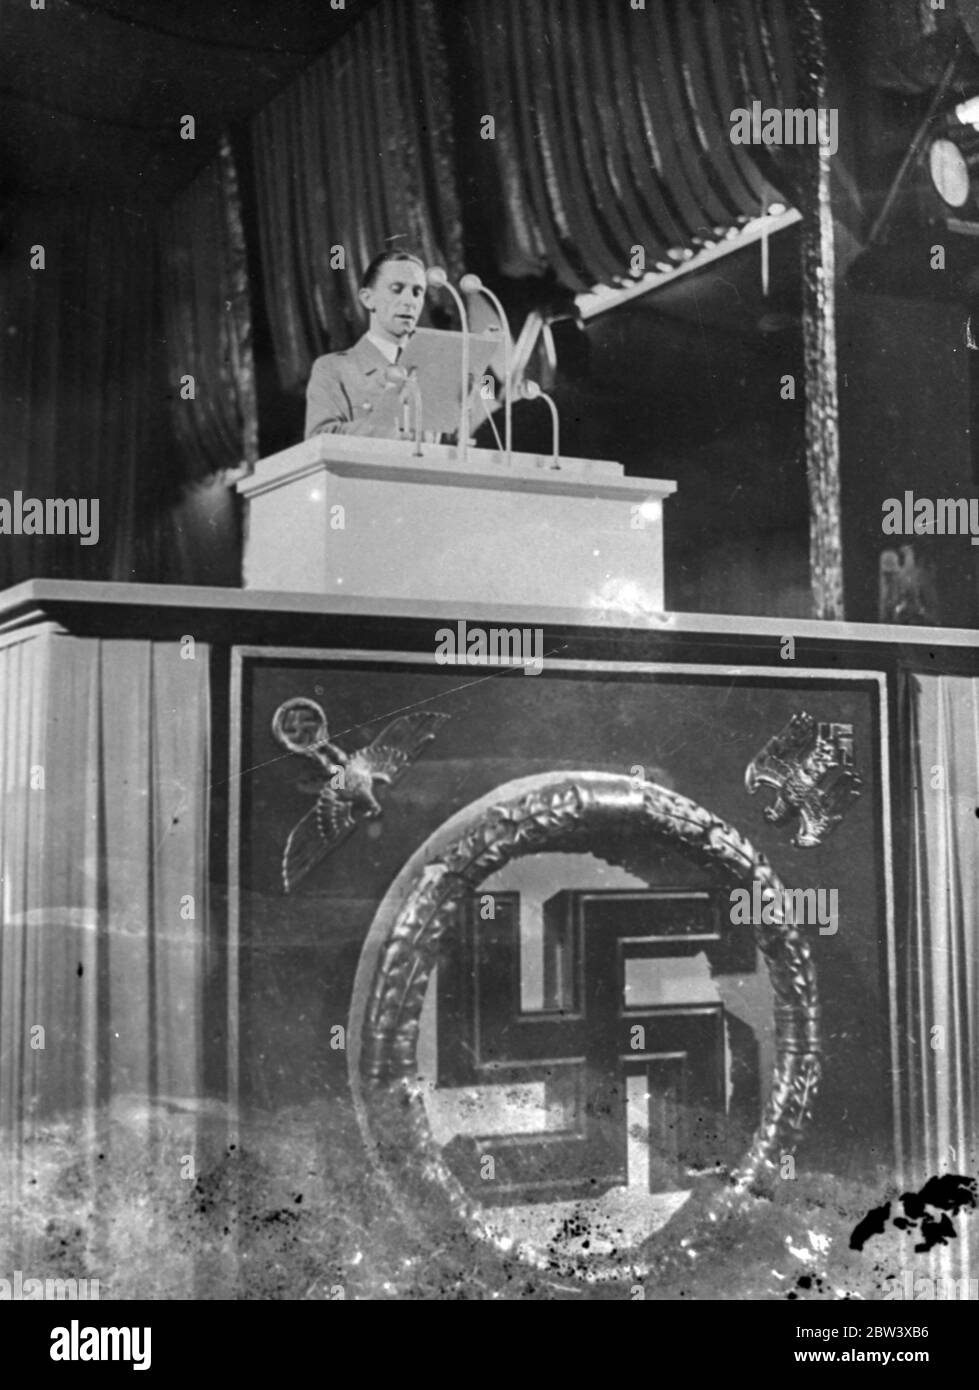 Dr . Goebbels makes violent attacks on Bolshevism at Nazi Congress . A violent attack on Bolshevism and the Jews was launched by Dr . Joseph Goebbels German Minister of propaganda, when he spoke at the Nazi party congress in Nuremberg .  [ He ? ] would ward off any attempt by Moscow to make Bolshevist propaganda in Germany with methods the ruthlessness of which would even surprise Moscow  , he declared .  Bolshevism is a pathological , criminal madness carried out by Jews as a means of an insulating the civilised nations of Europe  . Dr . Goebbels asserted . Photo shows : Dr Goebbels speaking Stock Photo